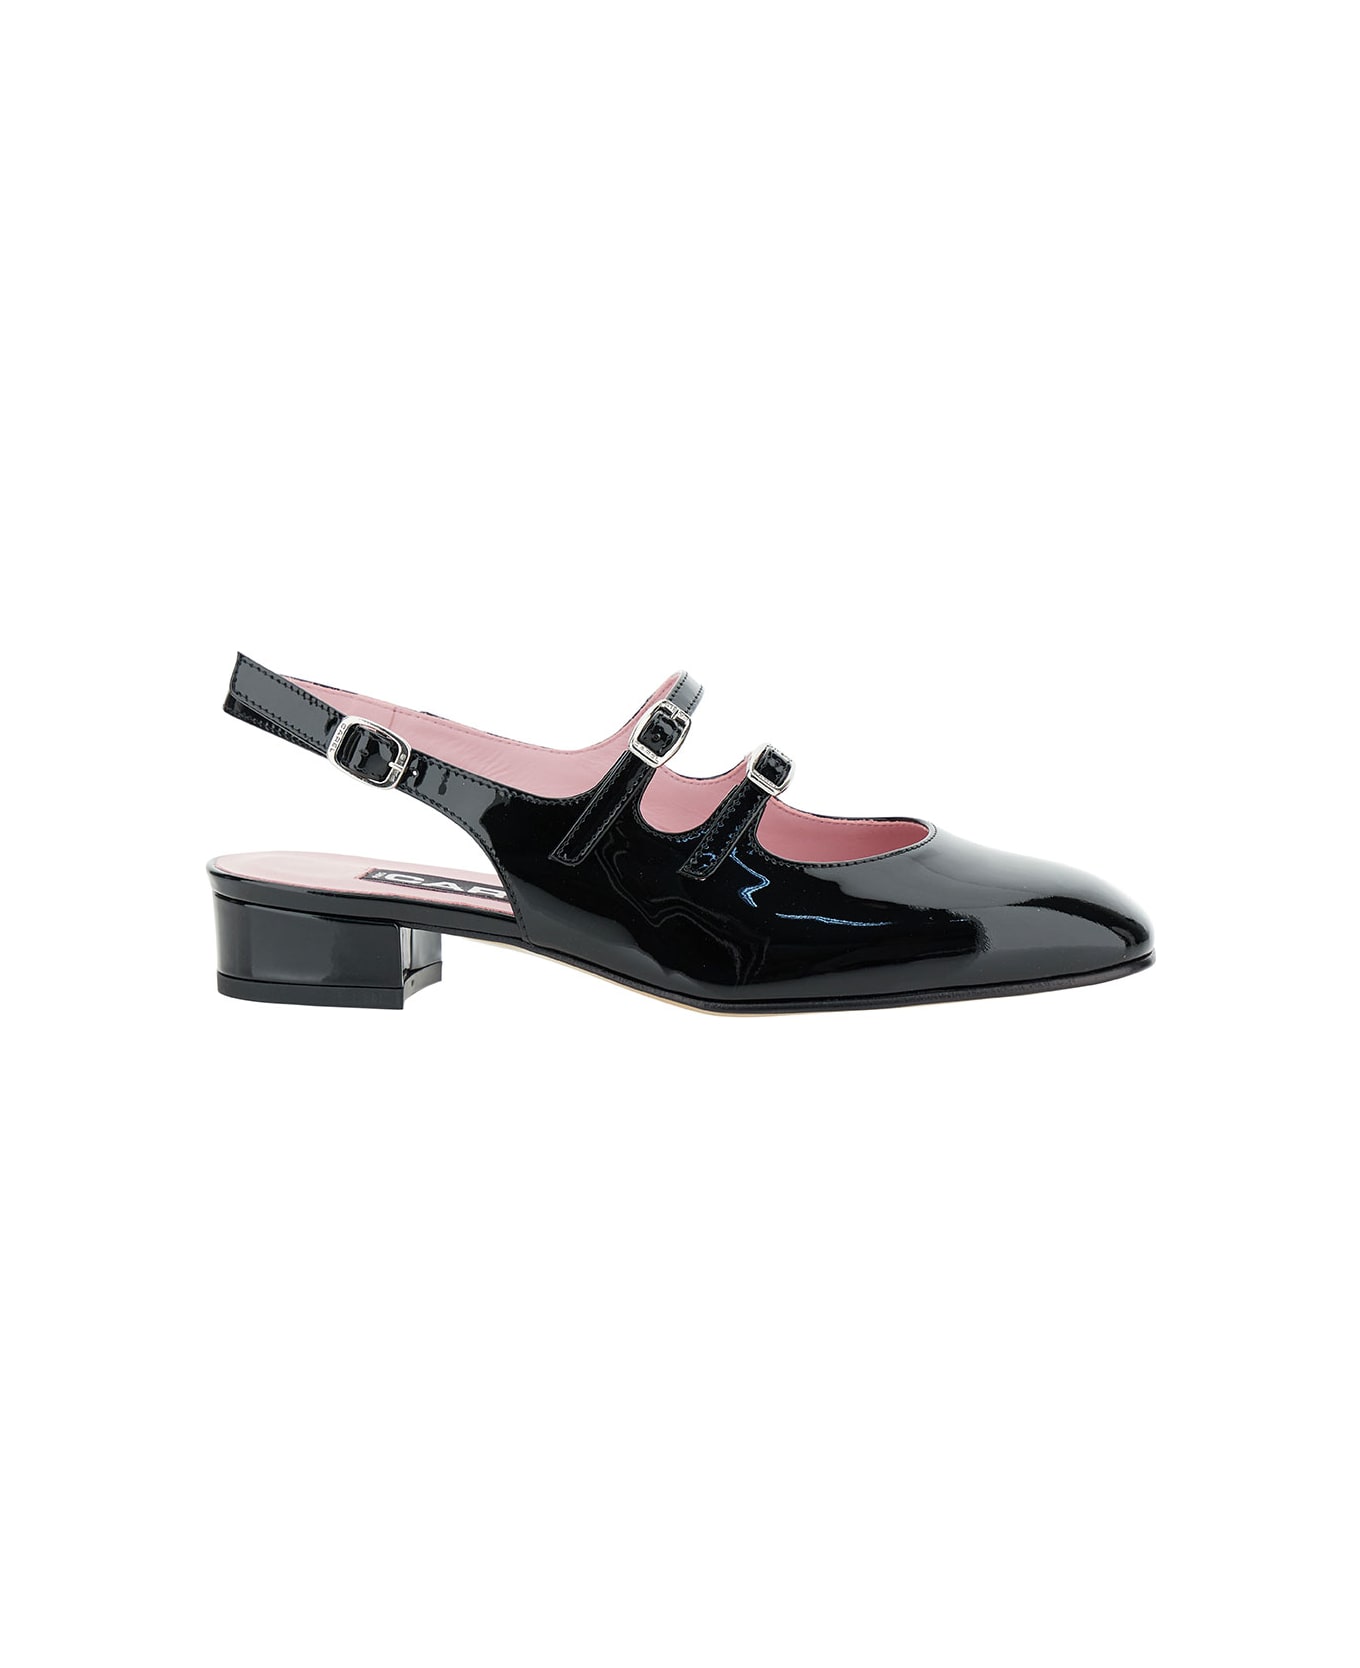 Carel Black Slingback Mary Janes With Block Heel In Patent Leather Woman - Black ハイヒール